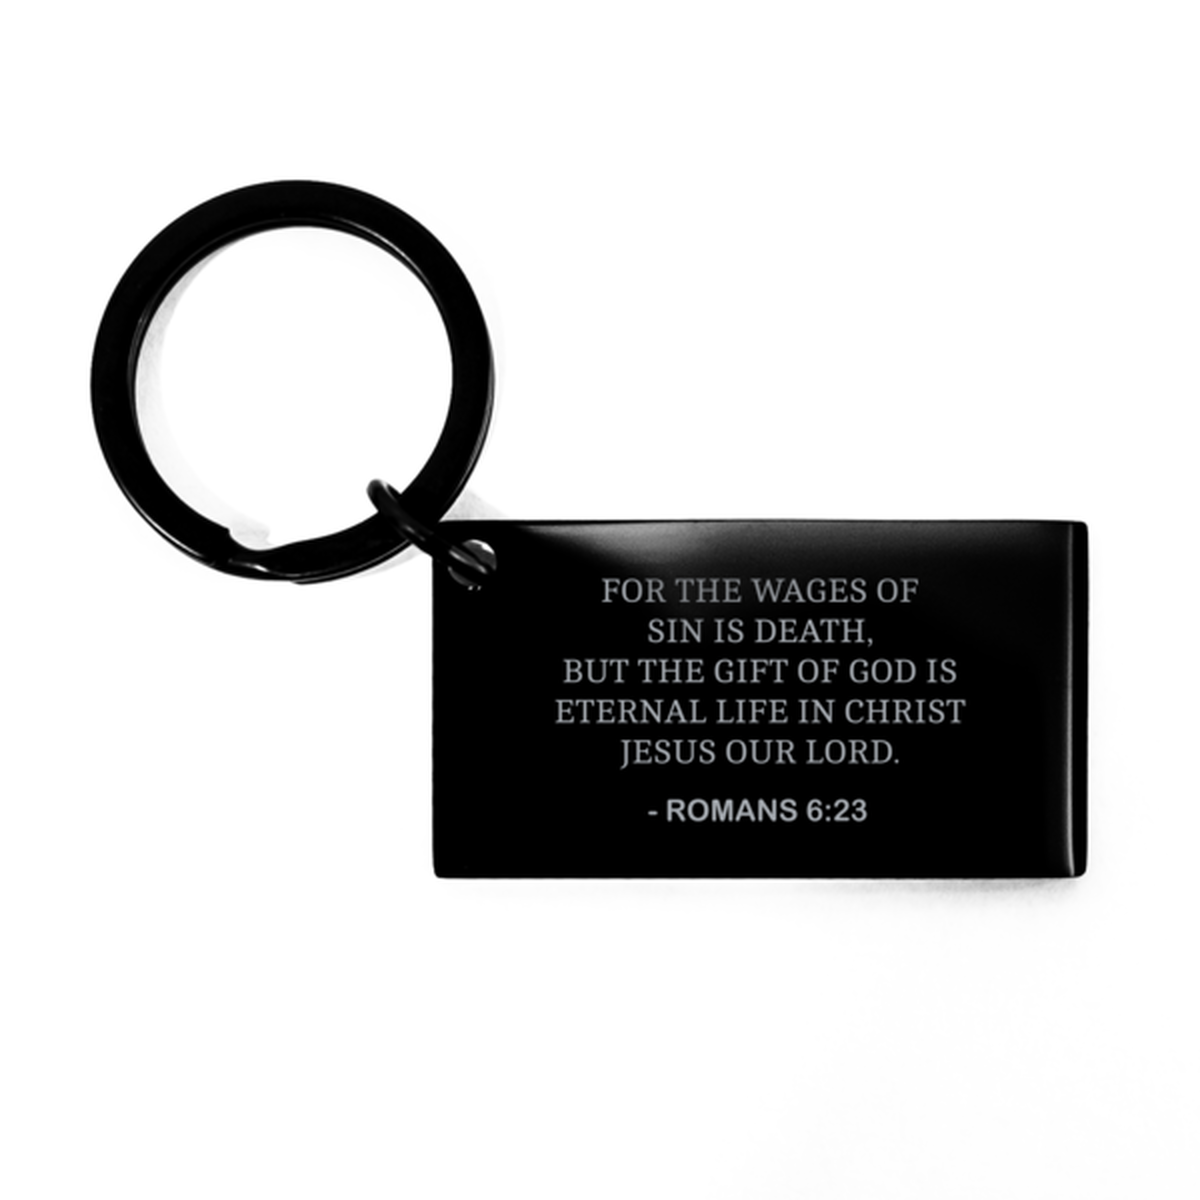 Bible Verse Black Keychain, Romans 6:23 For The Wages Of Sin Is Death, But The Gift Of, Christian Inspirational Key Ring Gifts For Men Women